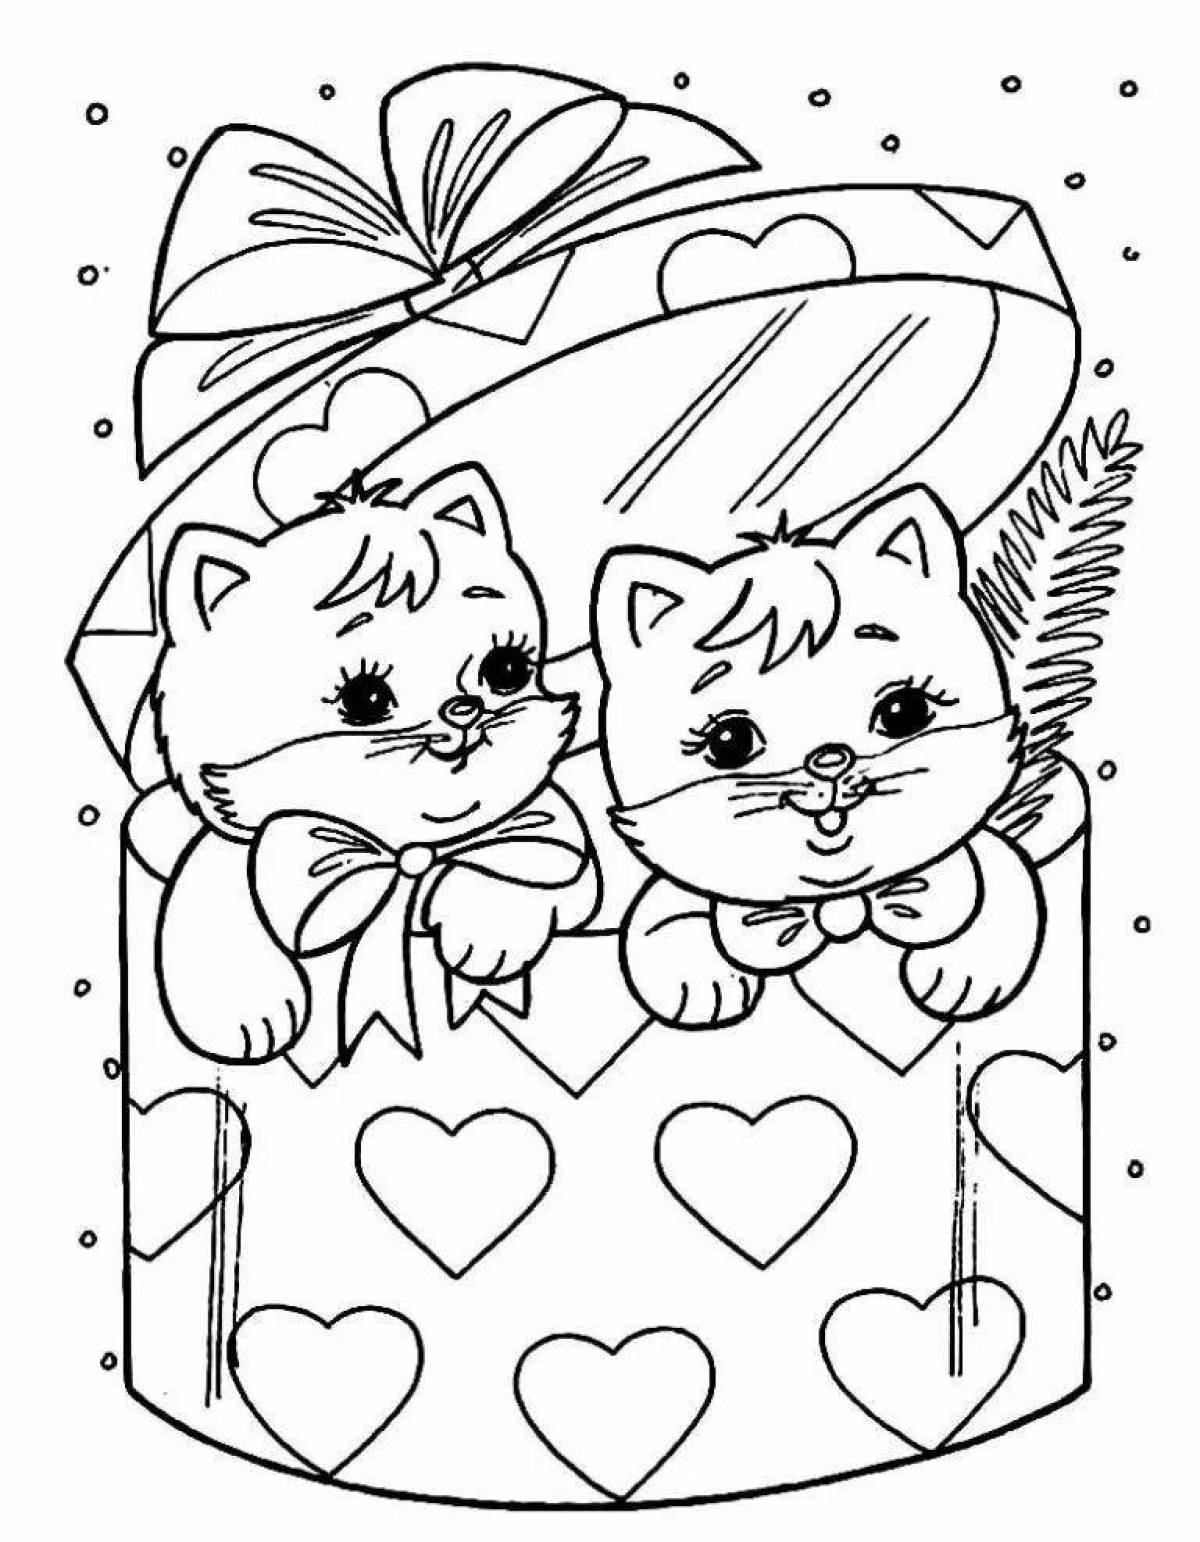 Coloring book admiring kitten for children 5-6 years old